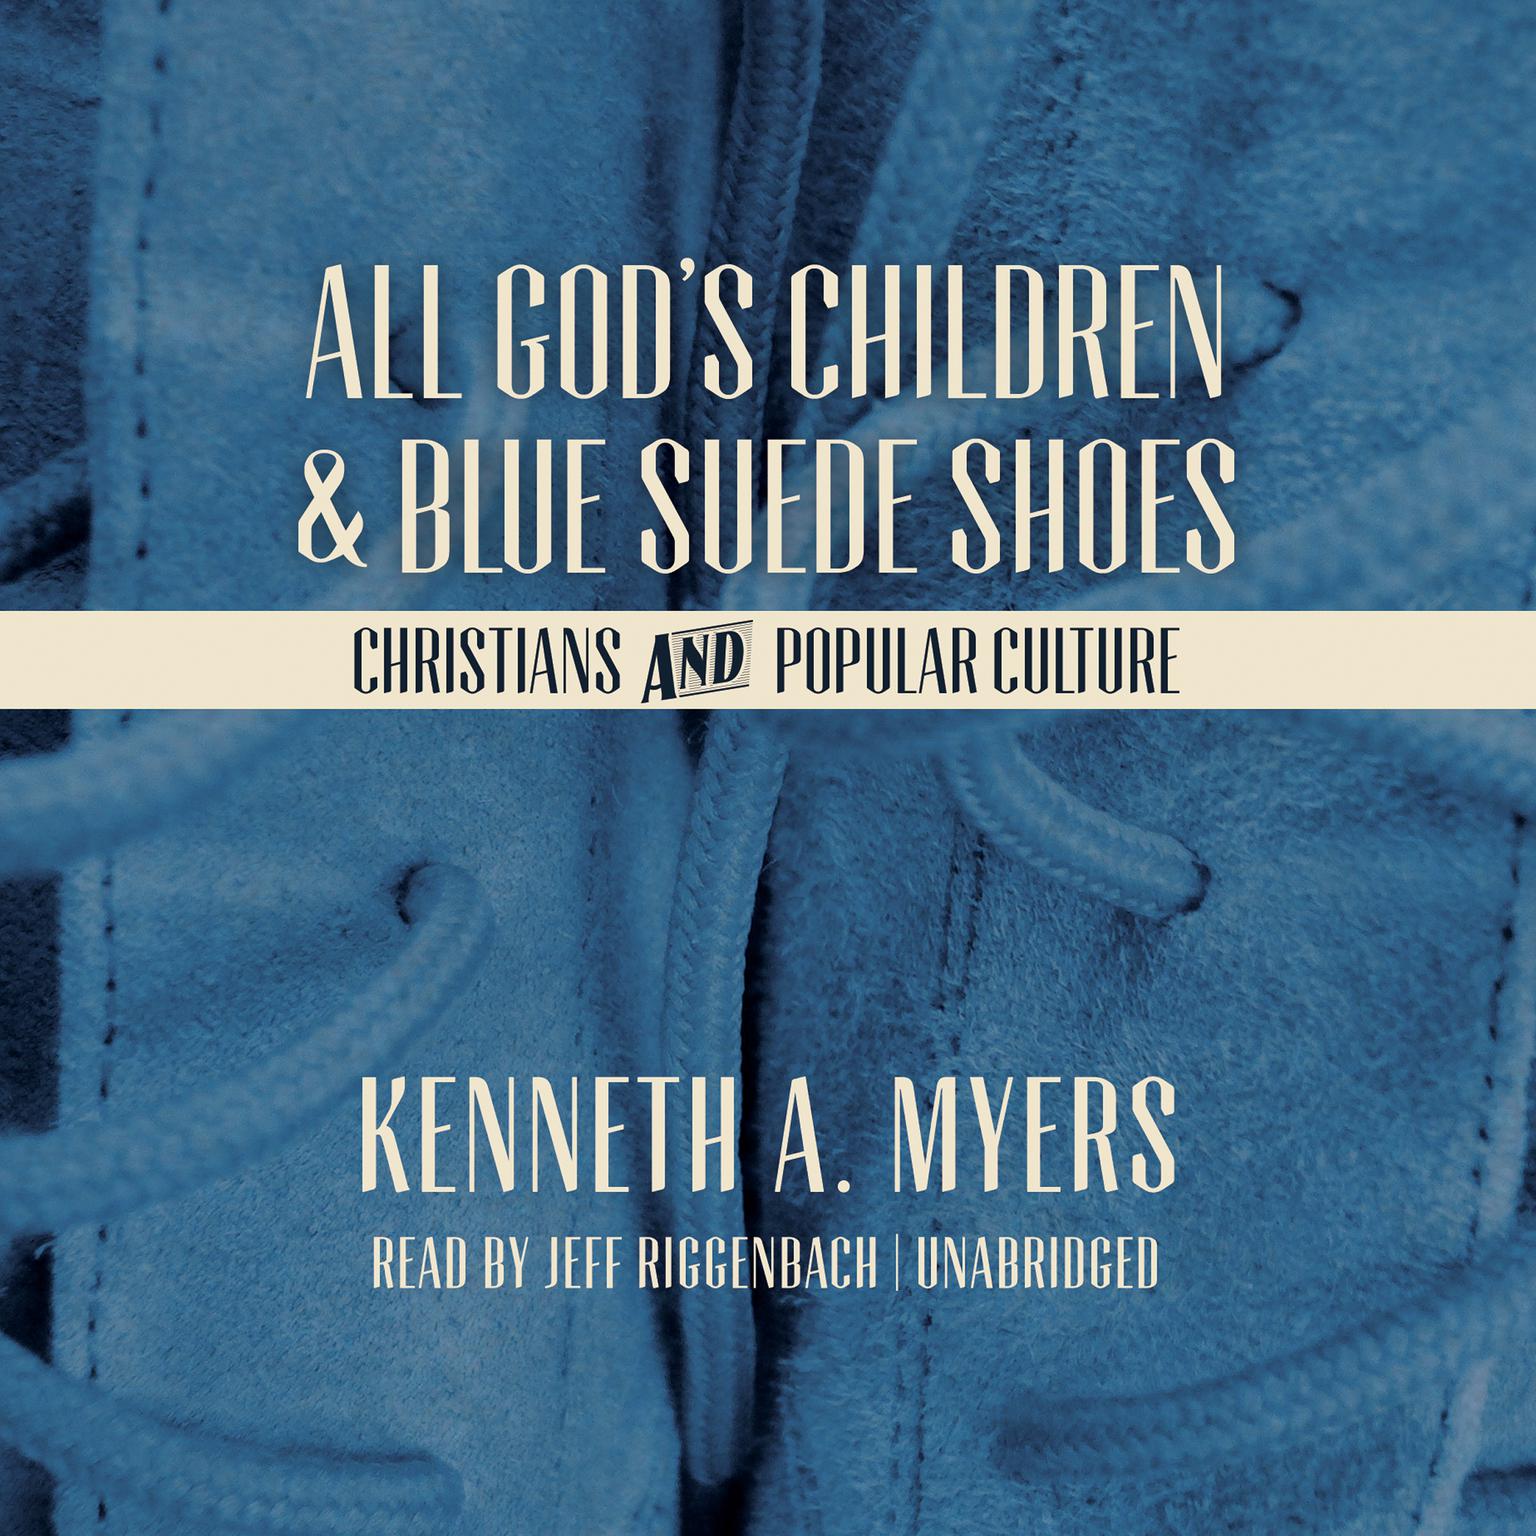 All God’s Children and Blue Suede Shoes: Christians and Popular Culture Audiobook, by Kenneth A. Myers